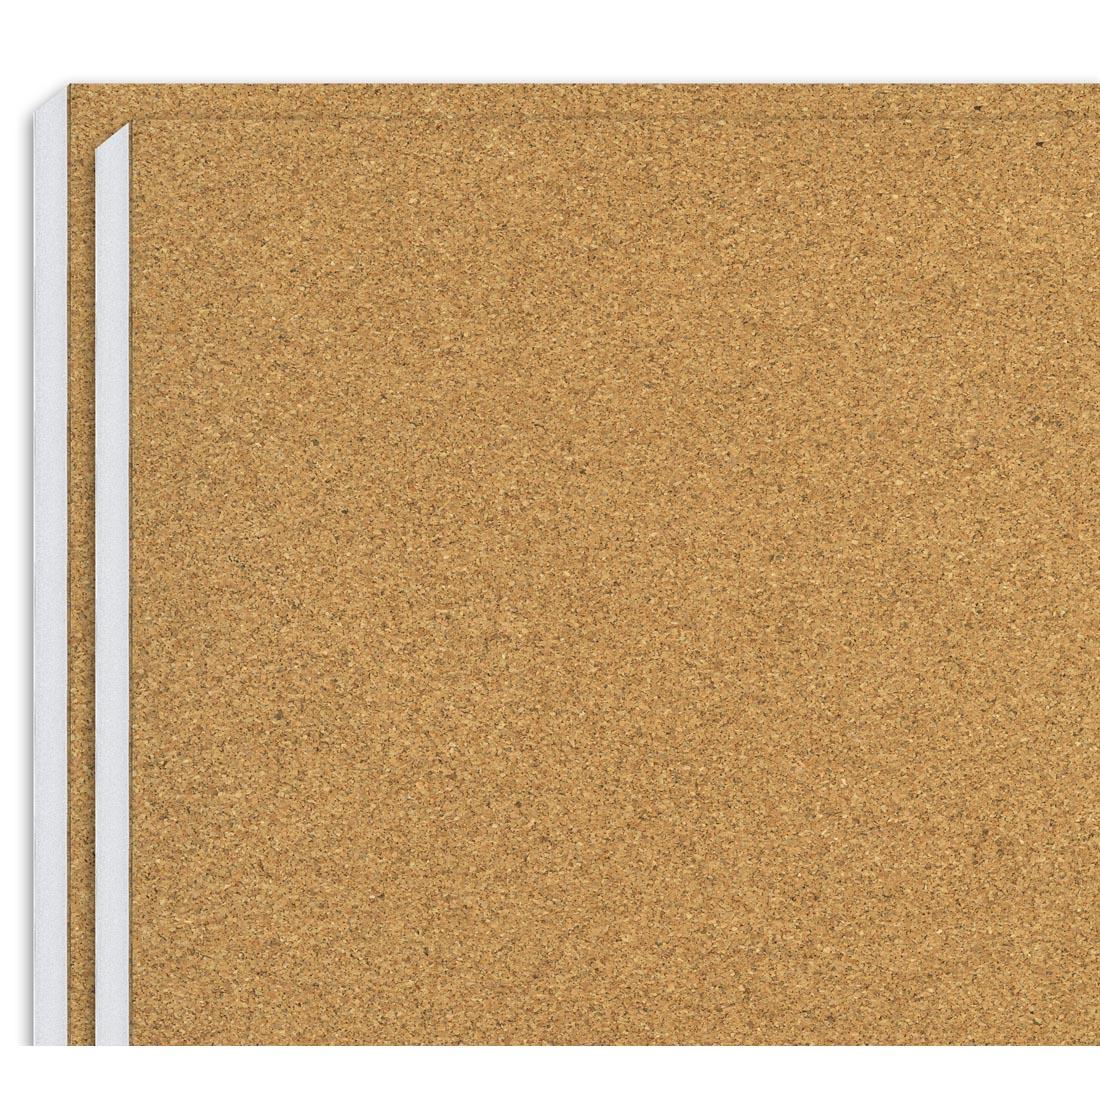 portion of cork board, 2-count package